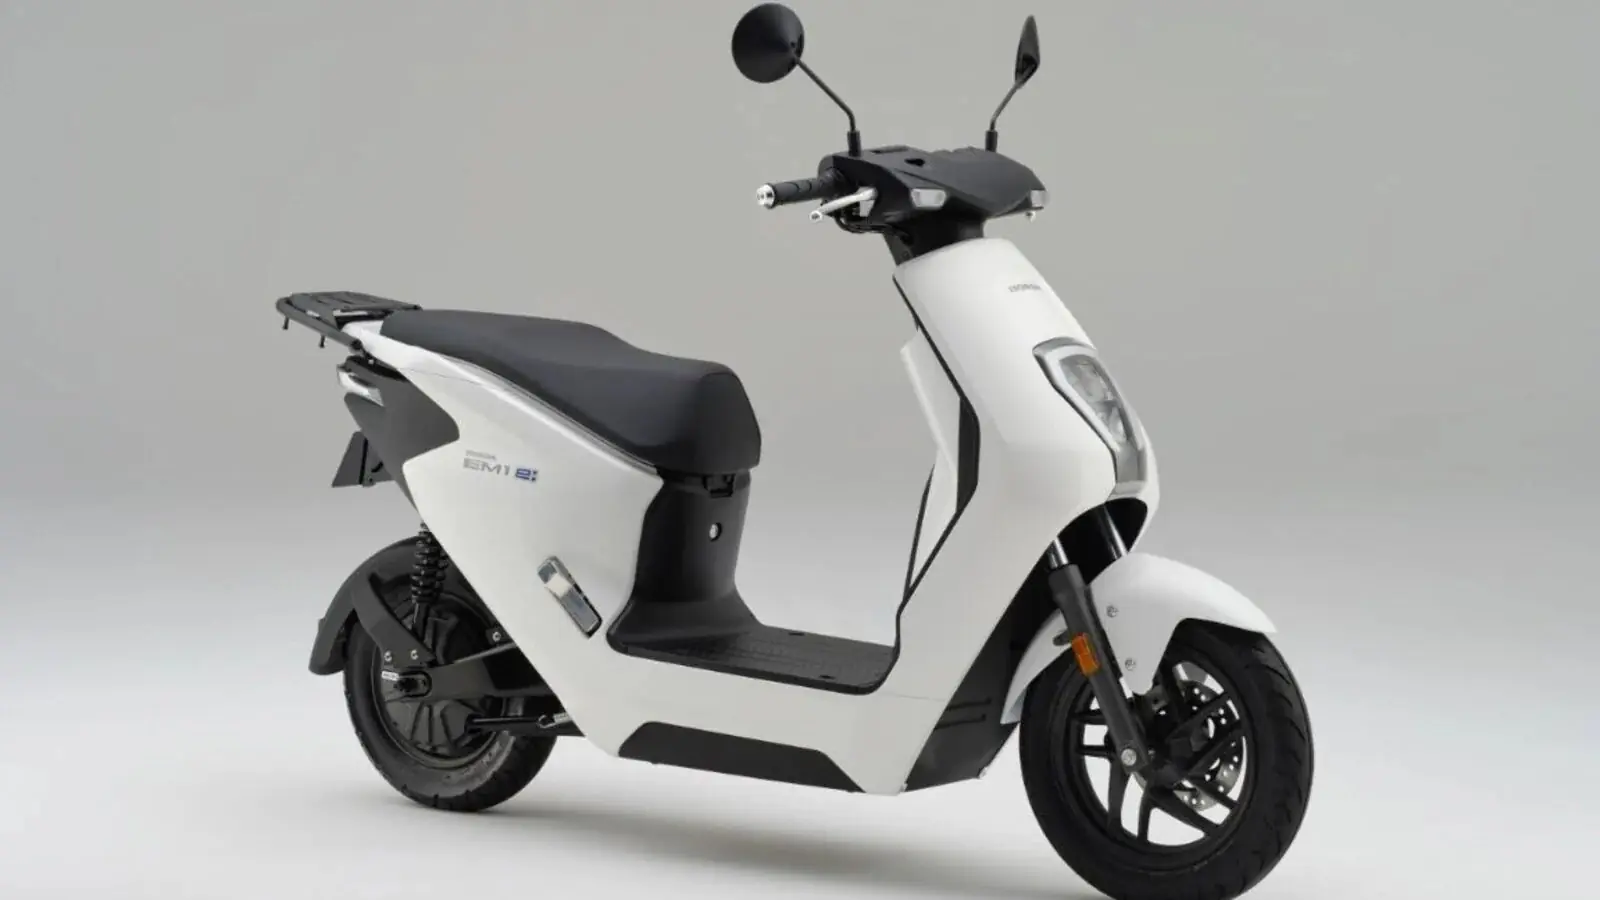 Honda Activa EV may be launched by the end of the year, production is going to start soon